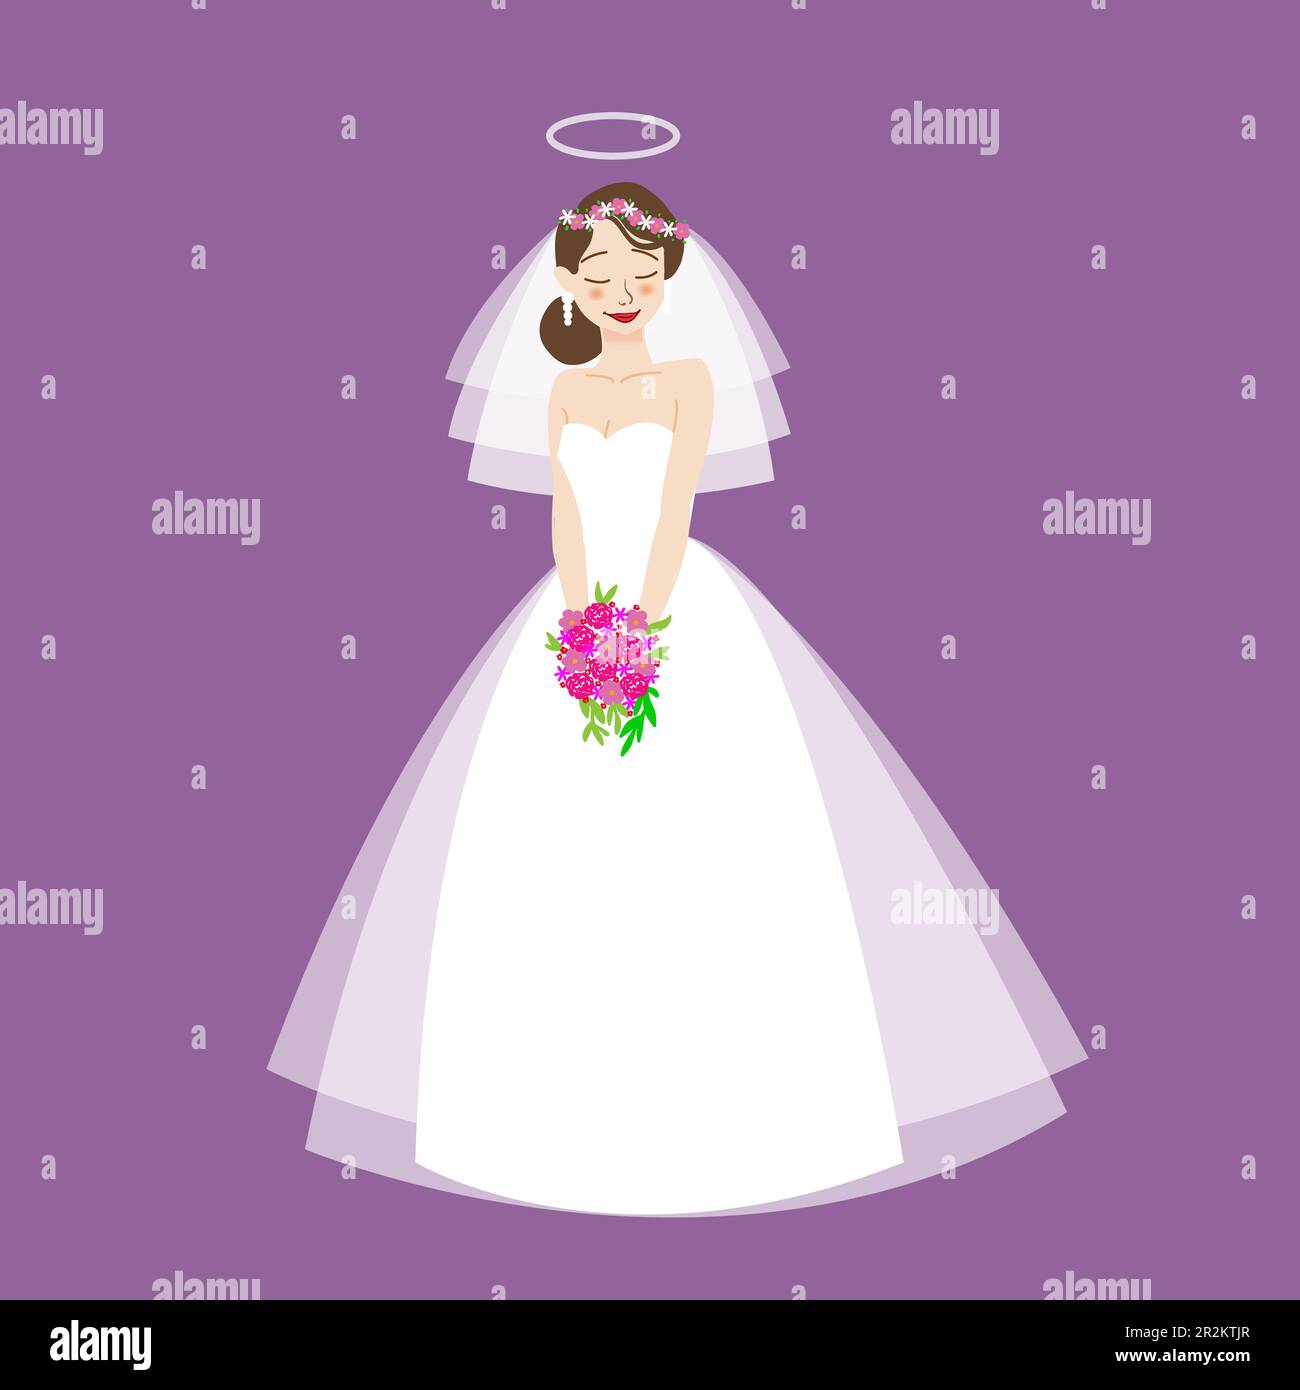 https://c8.alamy.com/comp/2R2KTJR/young-beautiful-bride-is-in-an-elegant-wedding-dress-vector-illustration-for-your-designinvitation-greeting-card-template-for-the-bride-show-2R2KTJR.jpg